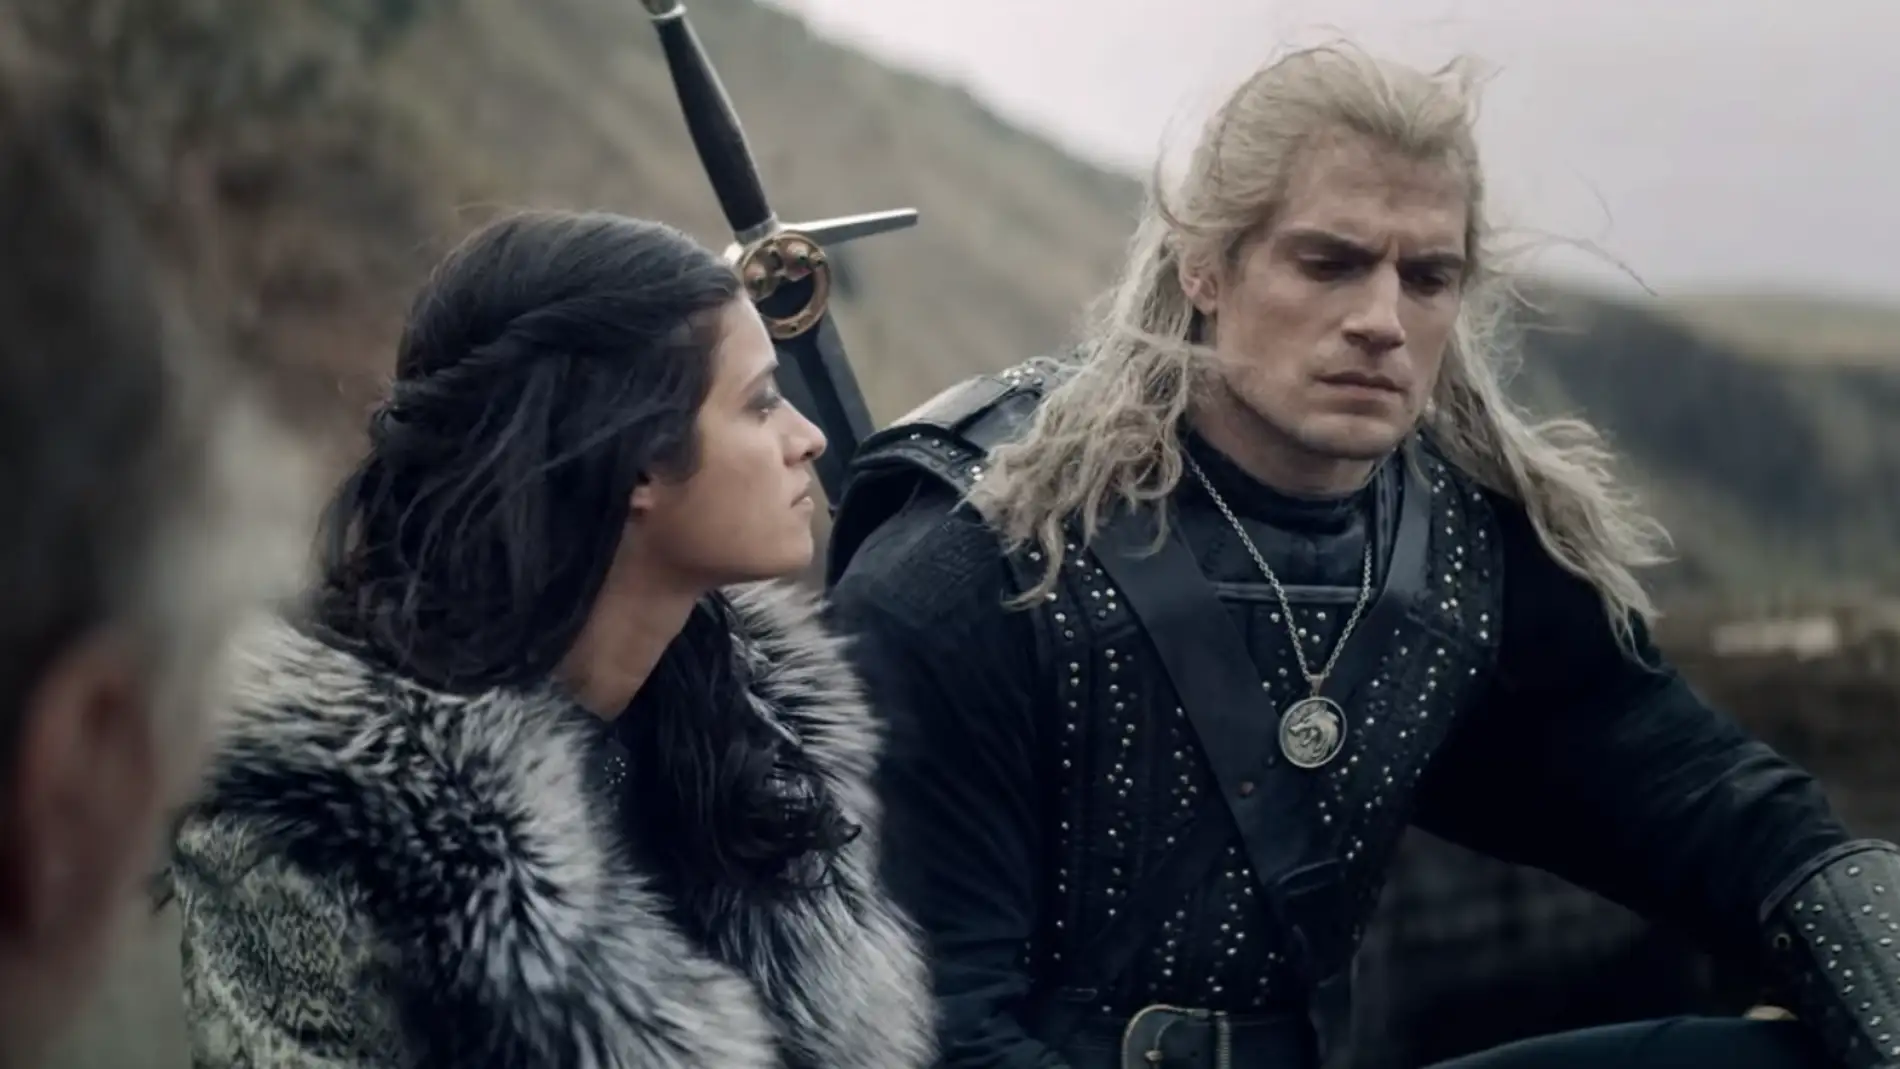 Yennefer y Henry Cavill en 'The Witcher'